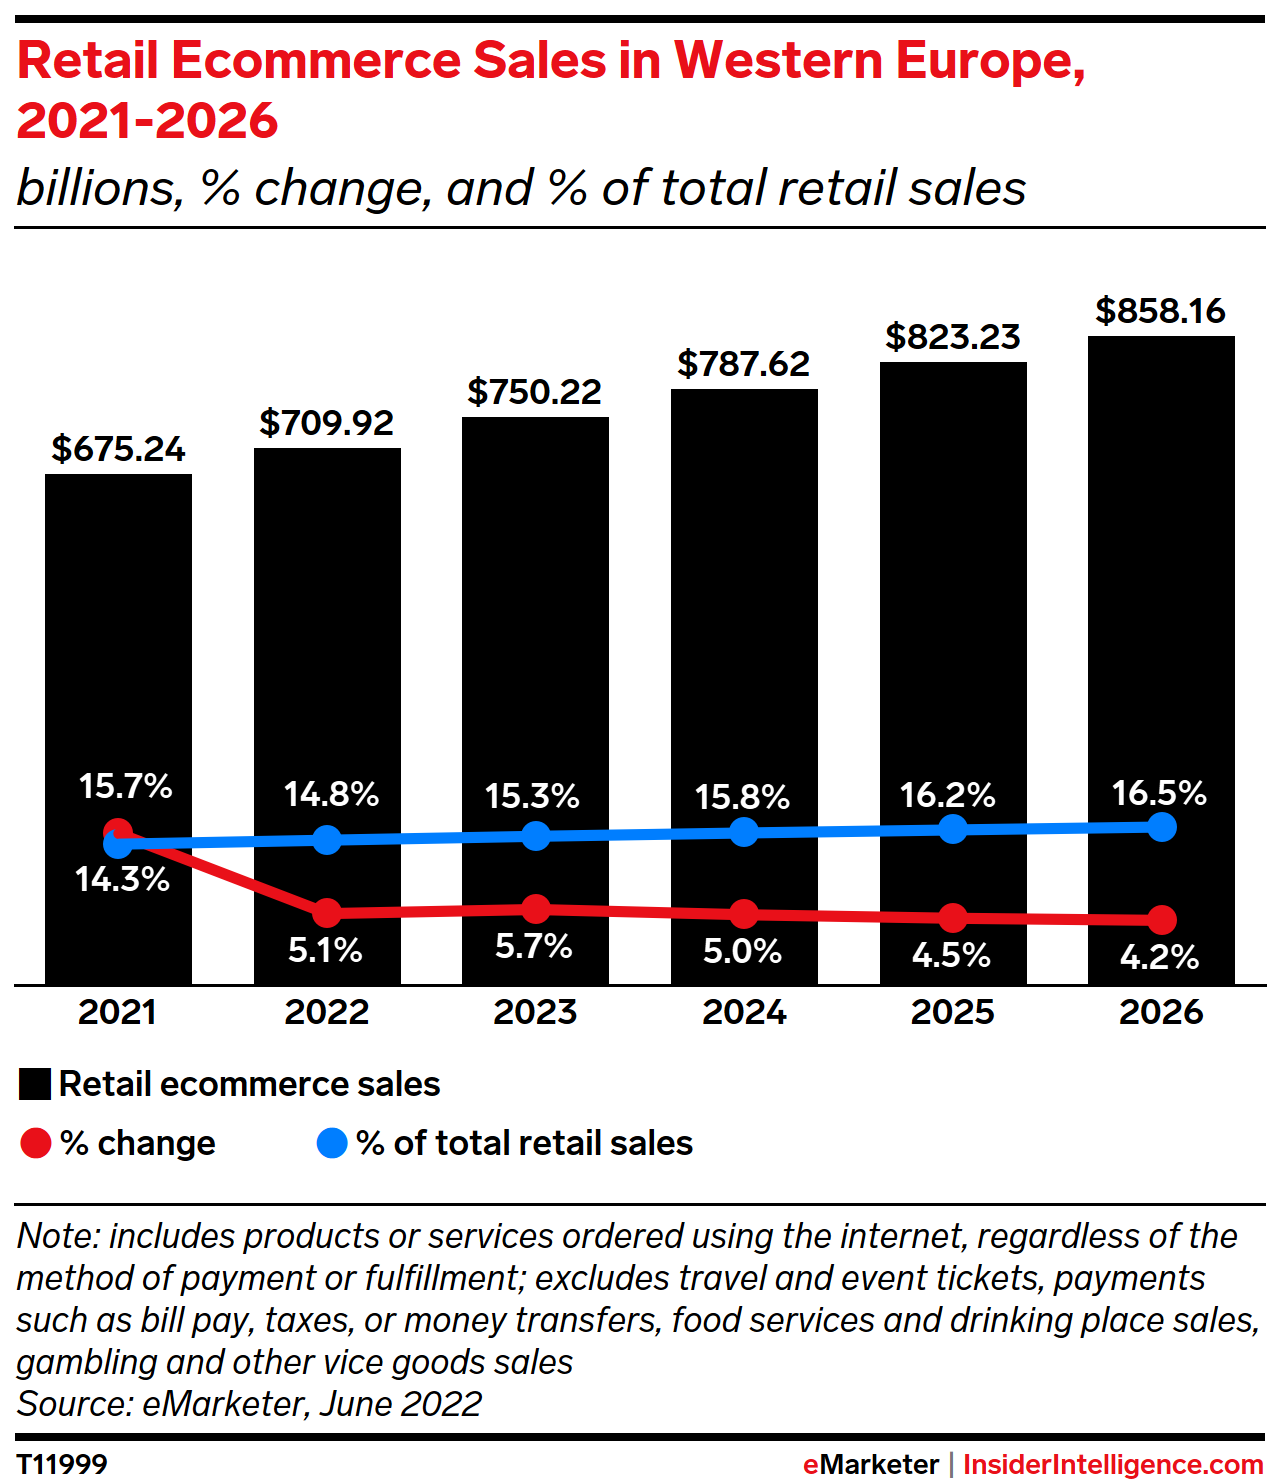 Retail Ecommerce Sales in Western Europe, 2021-2026 (billions, % change, and % of total retail sales)